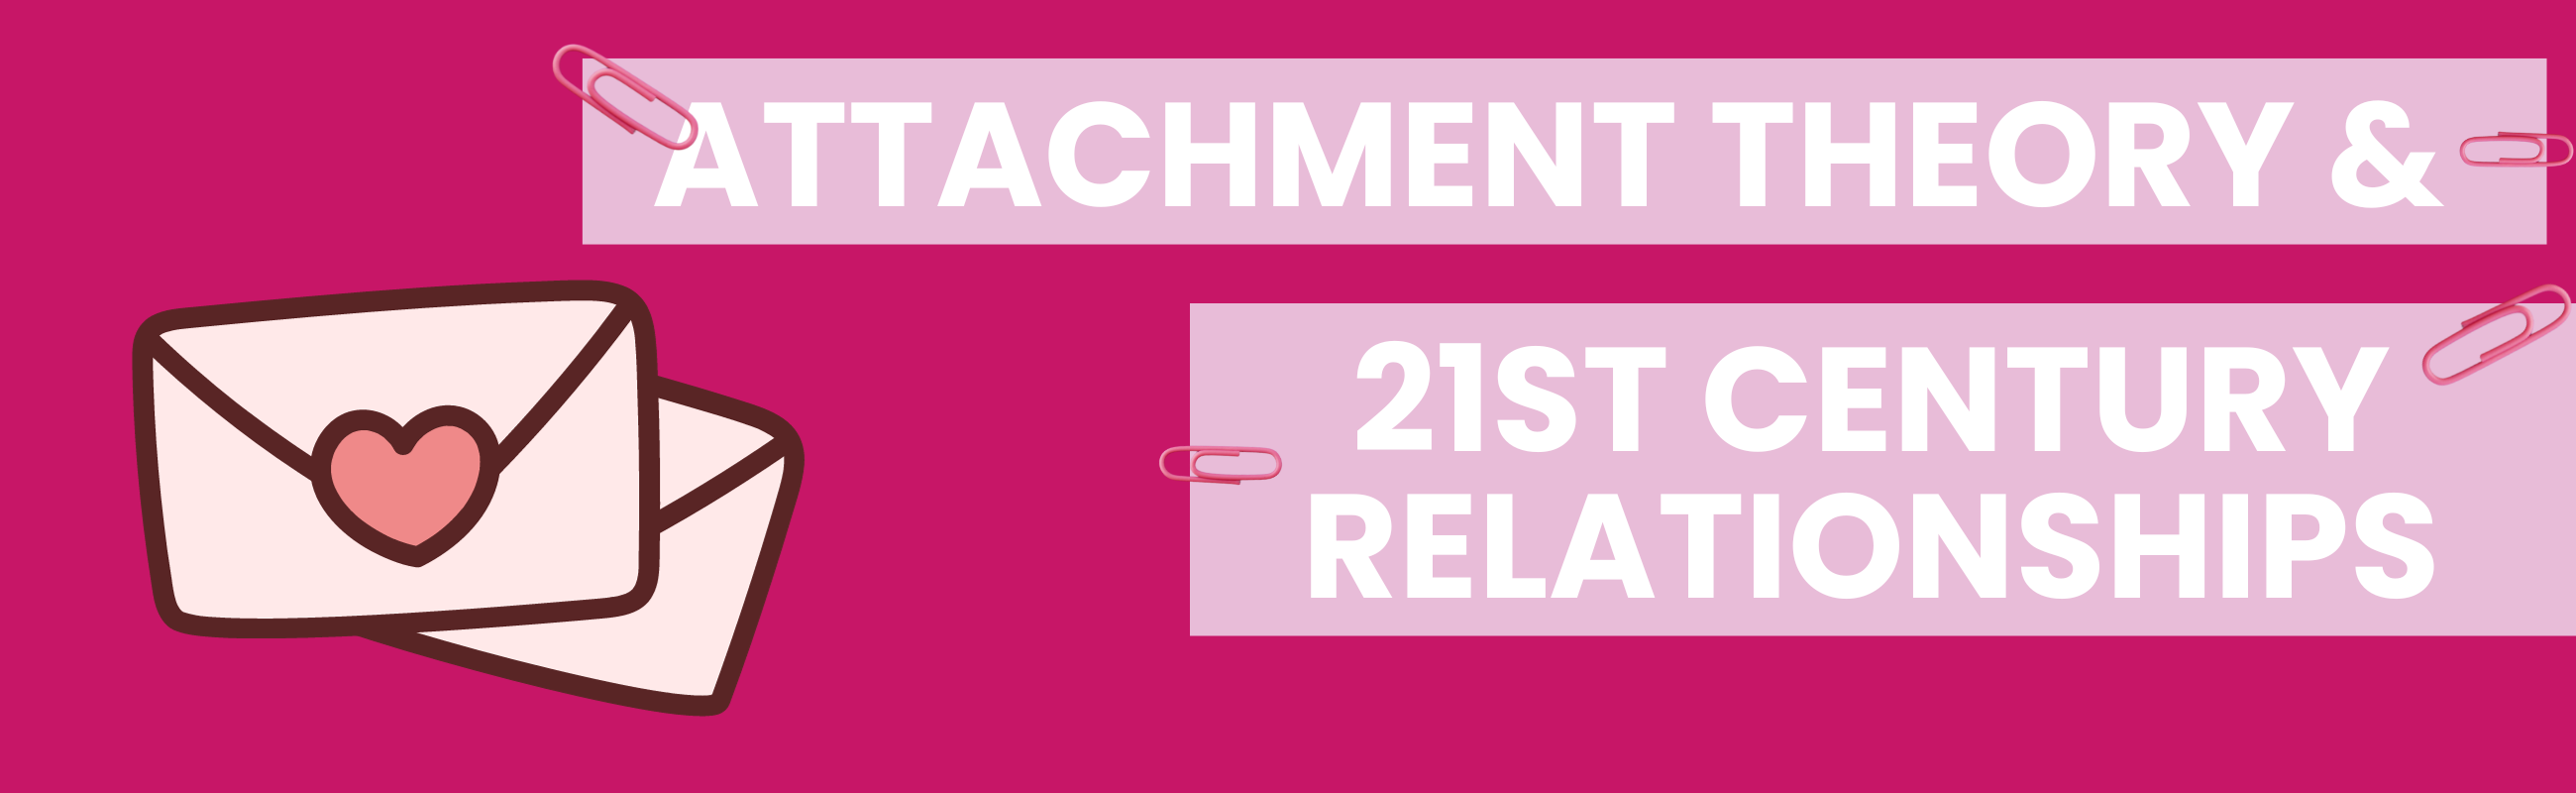 Image of an envelope and paper clips with text that reads: Attachment Theory & 21st Century Relationships